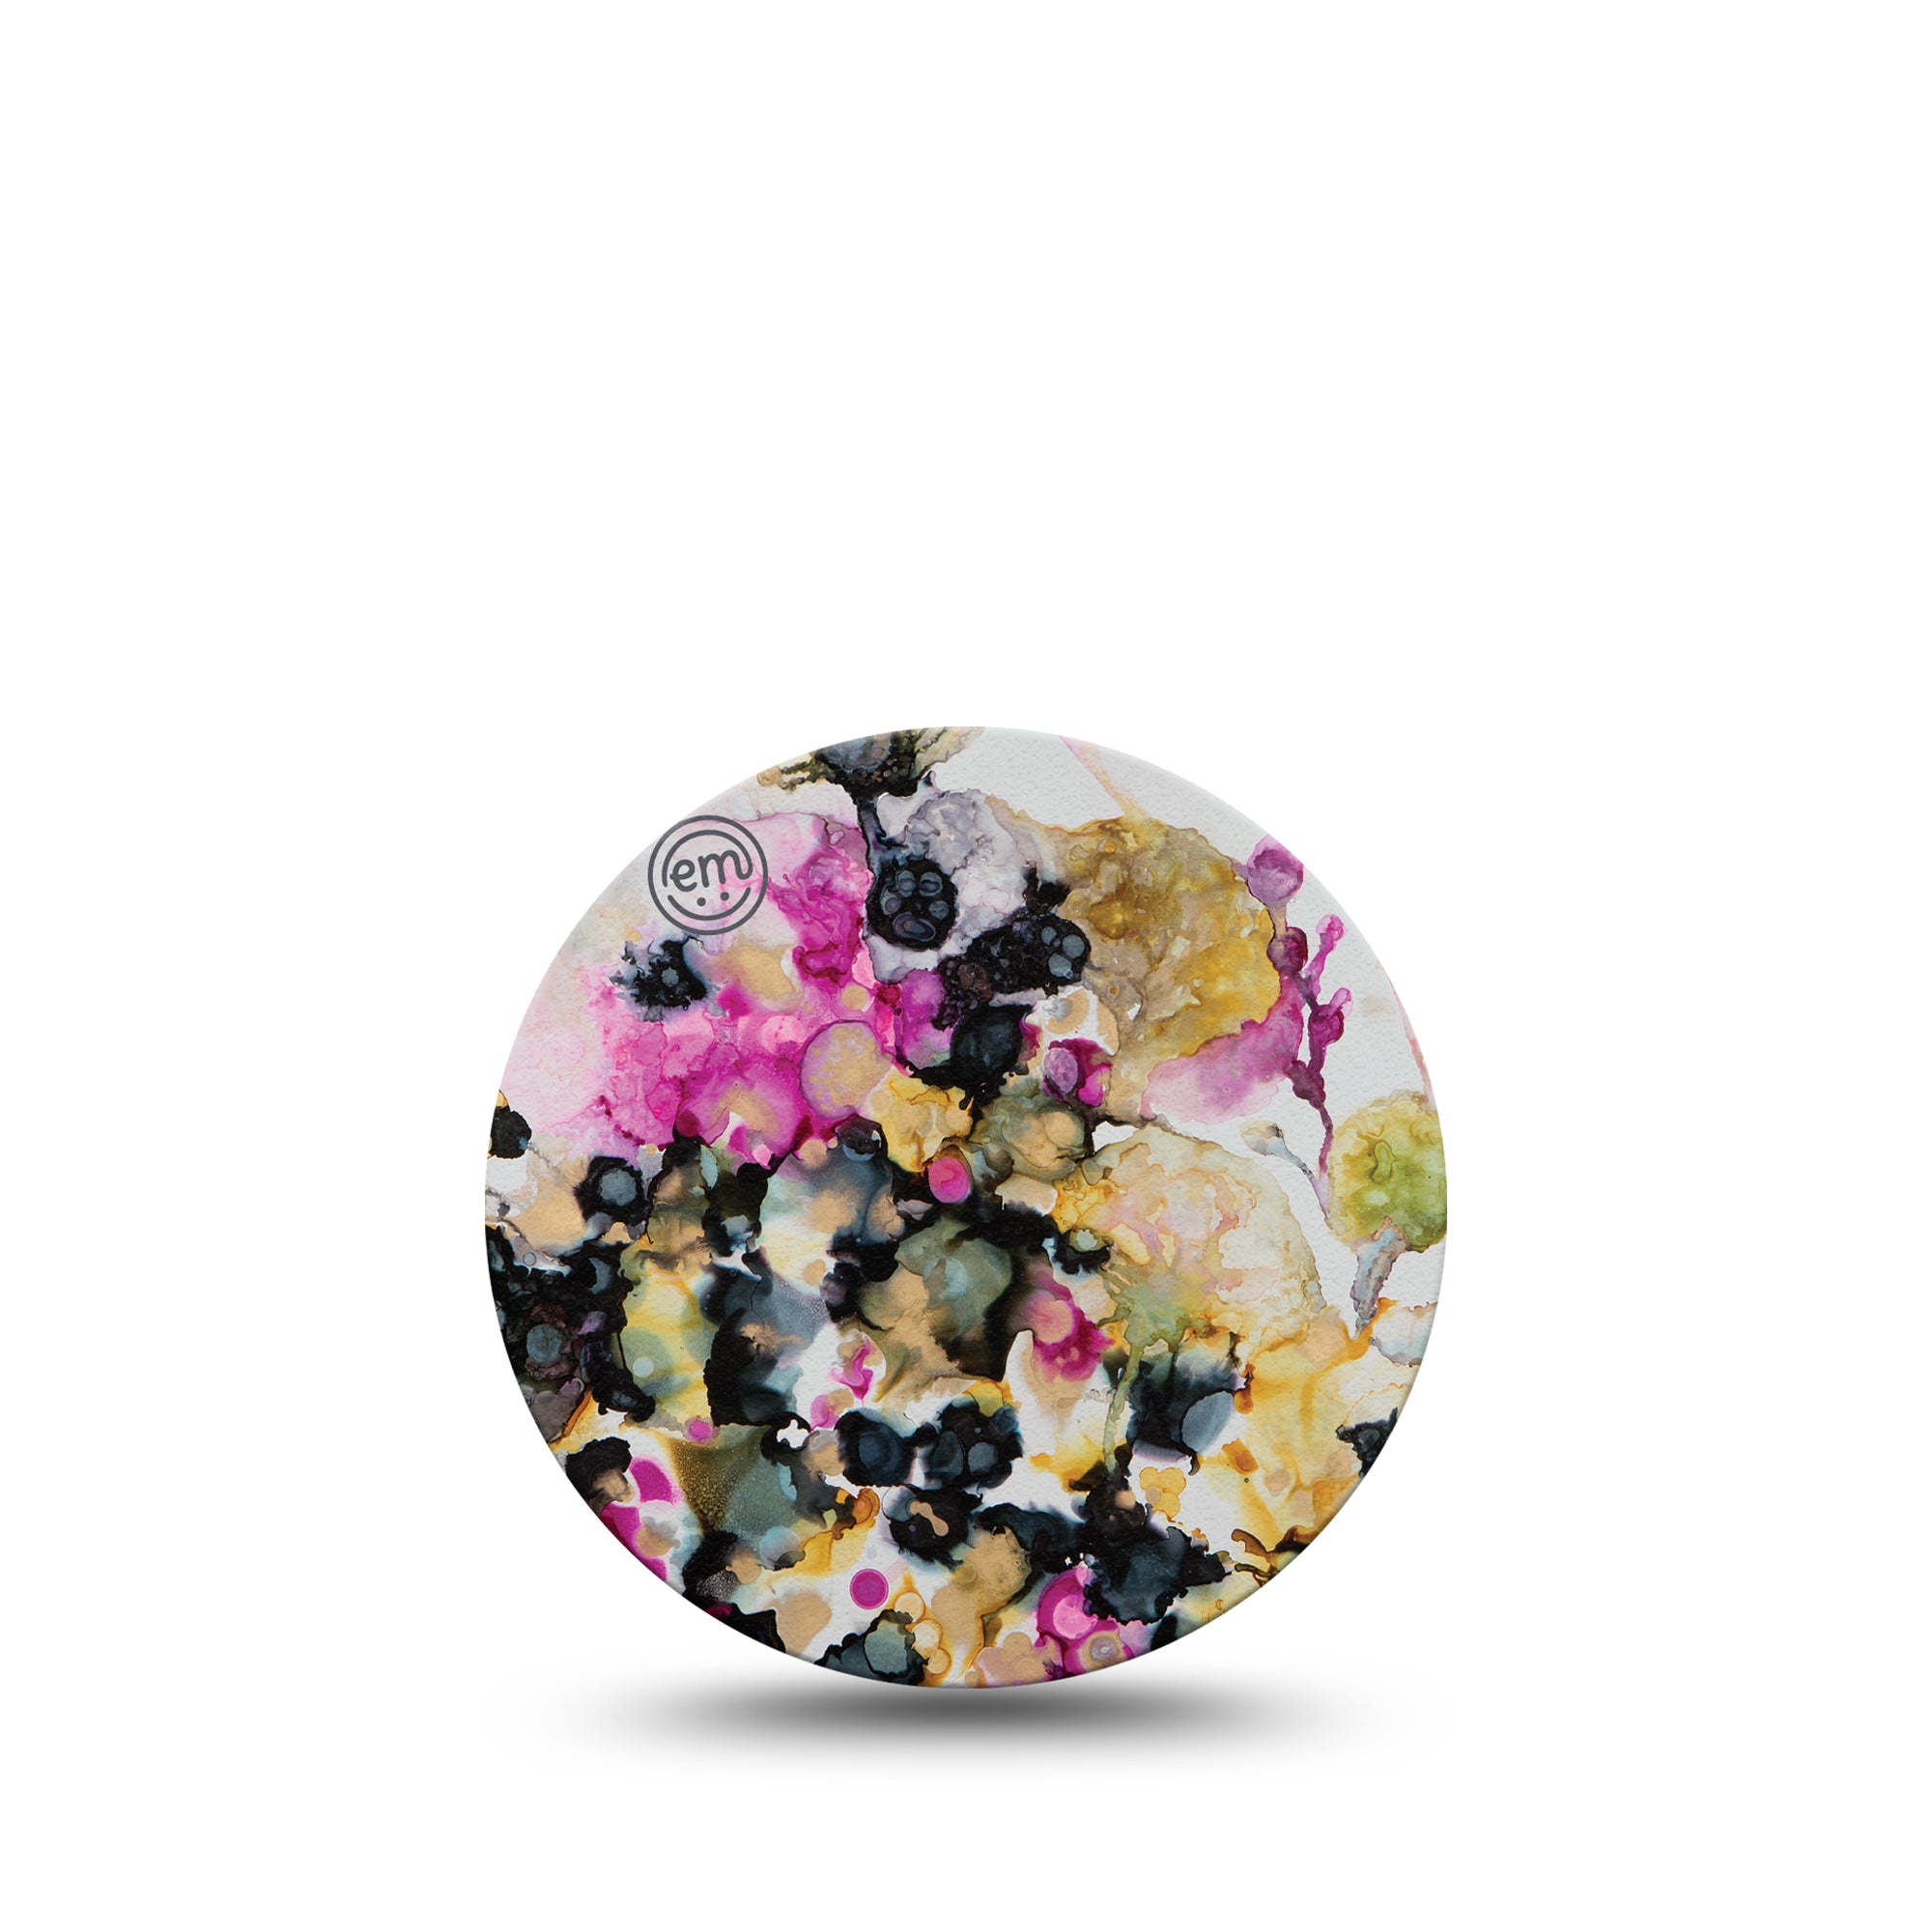 ExpressionMed Wild Blossoms Libre 3 Overpatch, Single, Dark Floral Themed, CGM Adhesive Tape Design